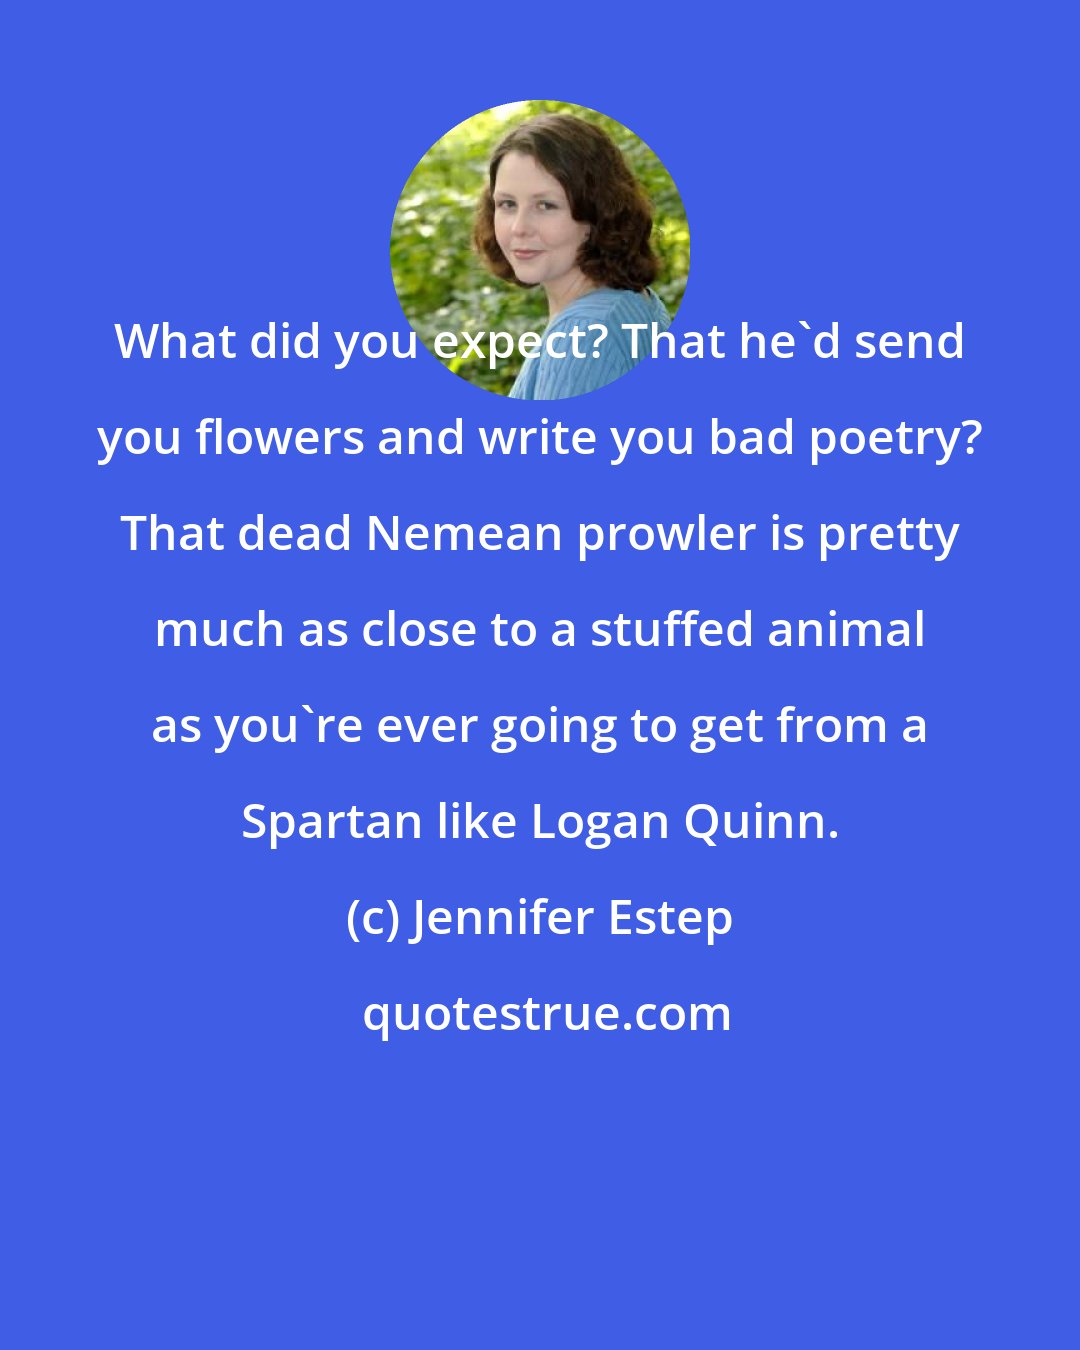 Jennifer Estep: What did you expect? That he'd send you flowers and write you bad poetry? That dead Nemean prowler is pretty much as close to a stuffed animal as you're ever going to get from a Spartan like Logan Quinn.